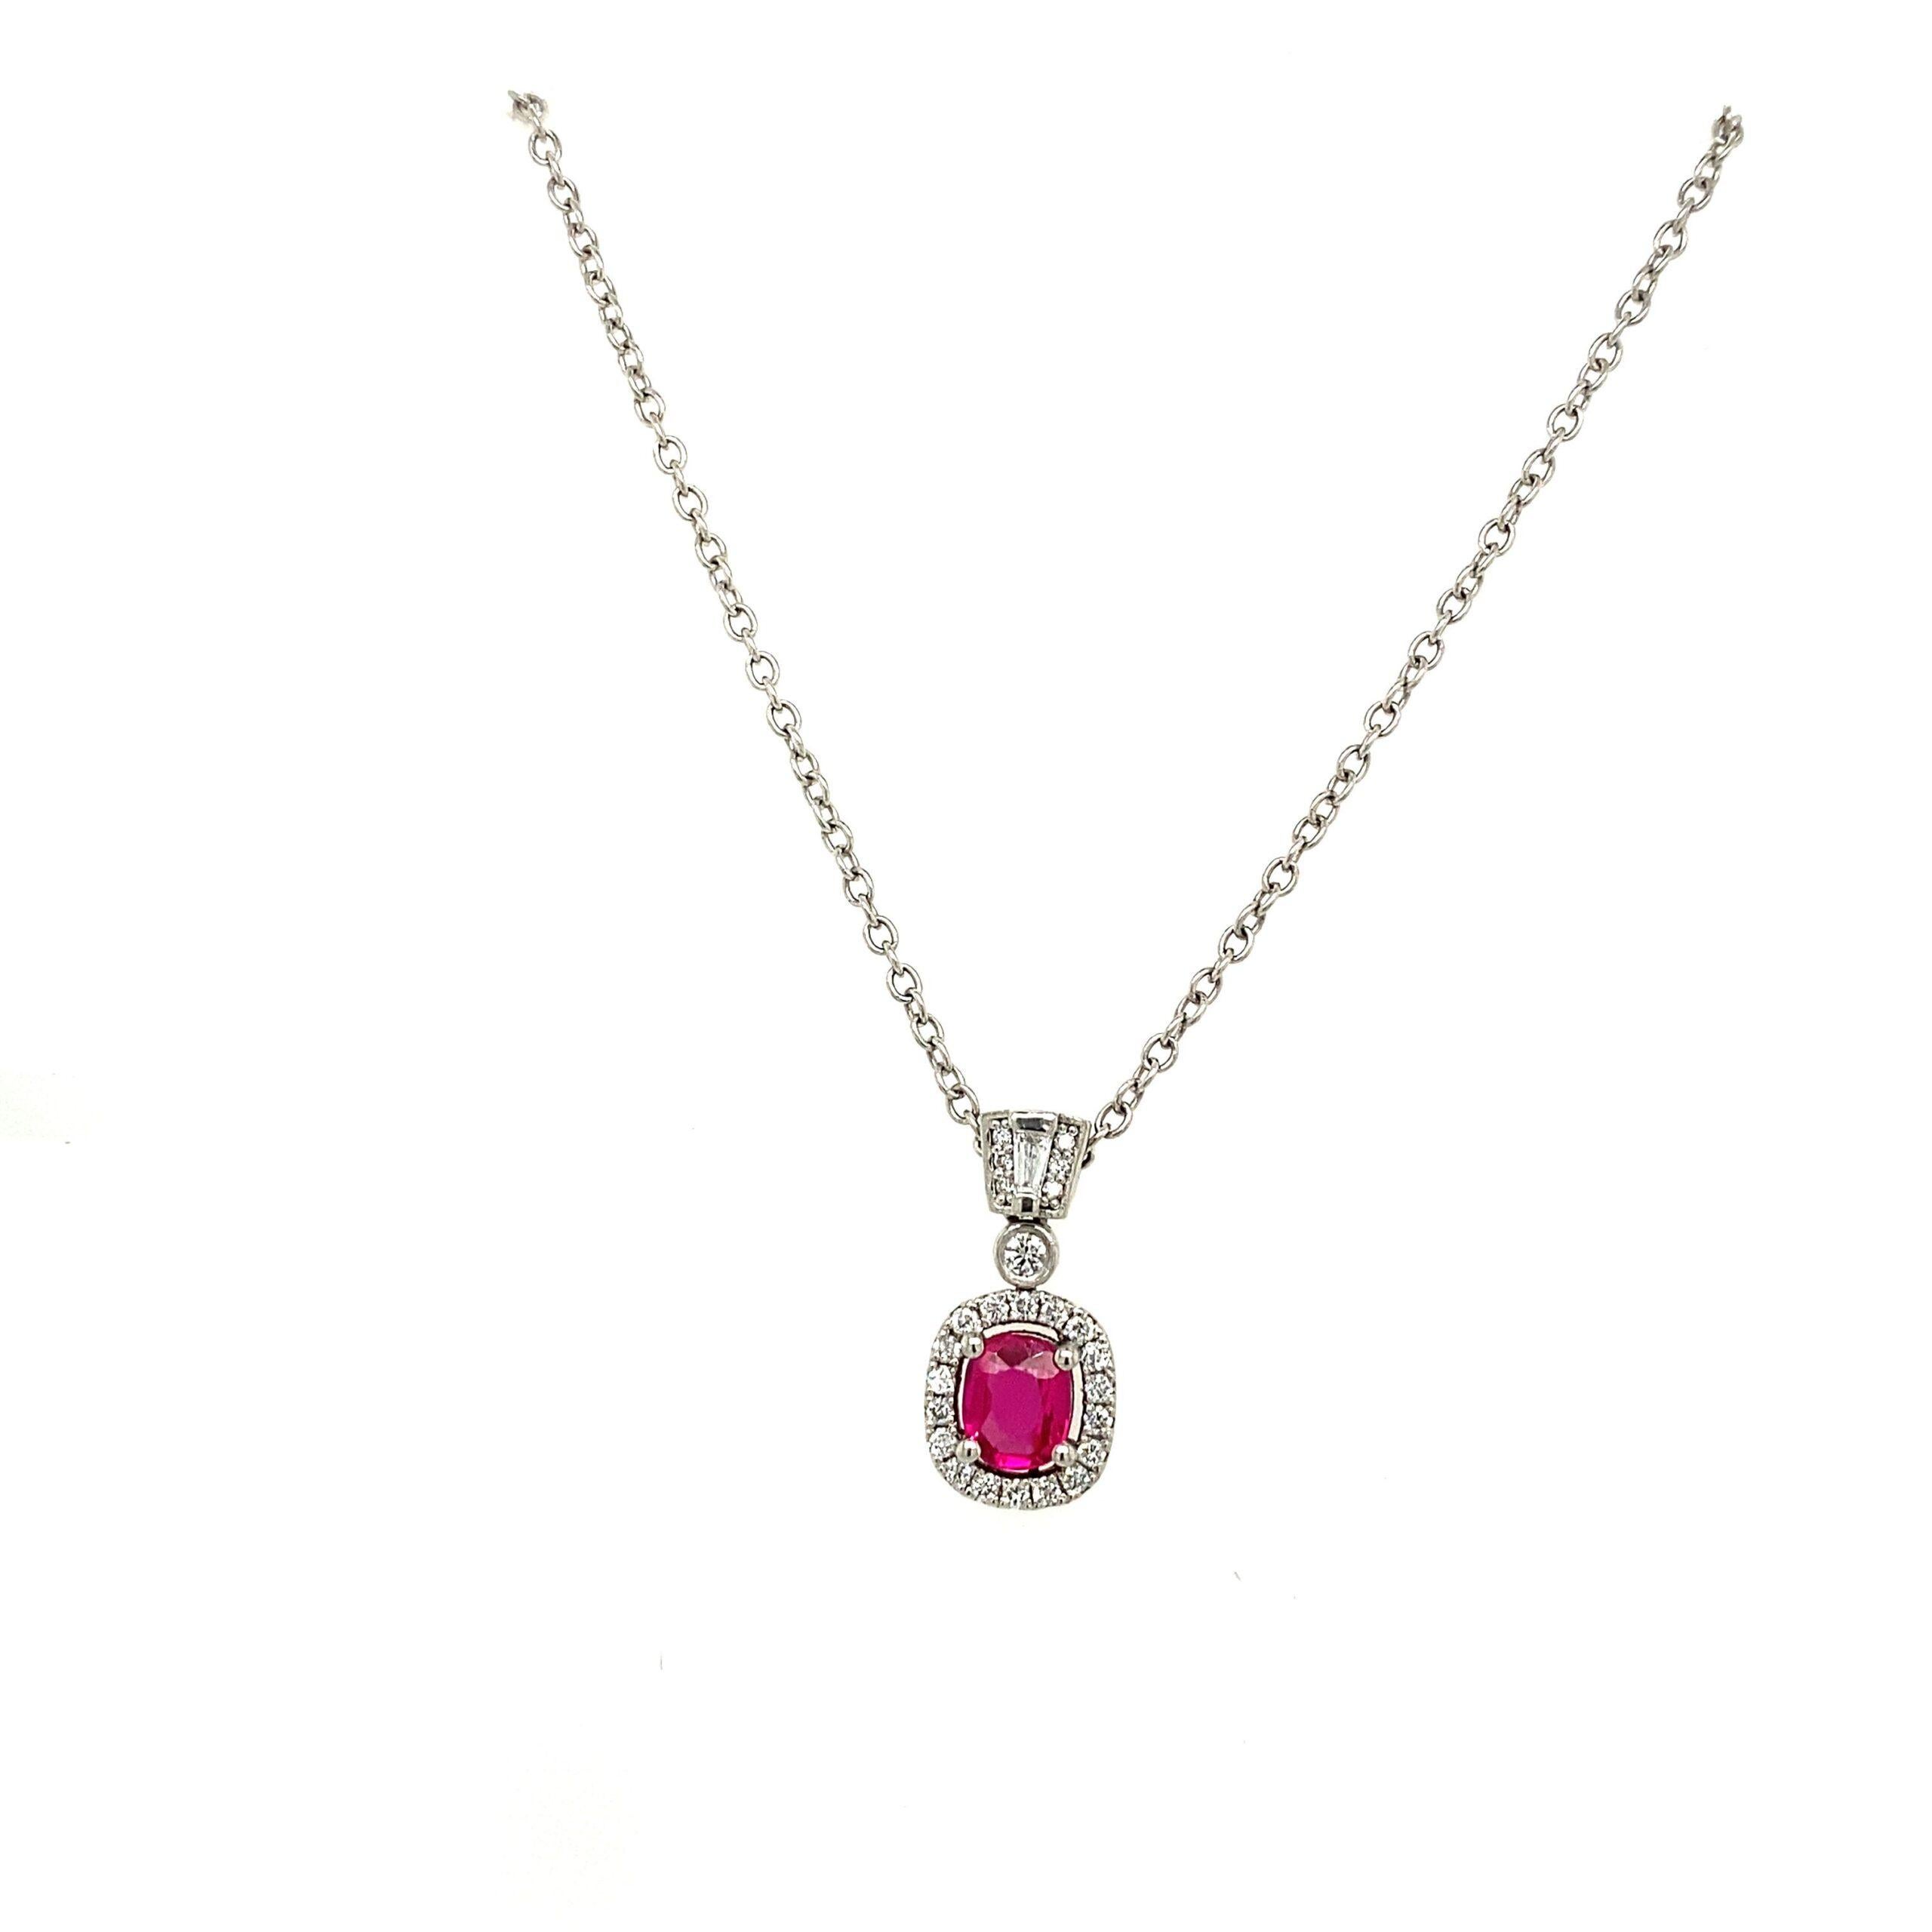 0.70ct Finest Quality Cushion Shape Ruby Pendant, Set with 0.42ct Of Diamonds

Surrounded by Round Brilliant Cut Diamonds  & One Tapered Baguette. Suspended on 14'' Platinum Trace Chain.

Additional Information:
Diamond Weight: 0.42ct
Diamond